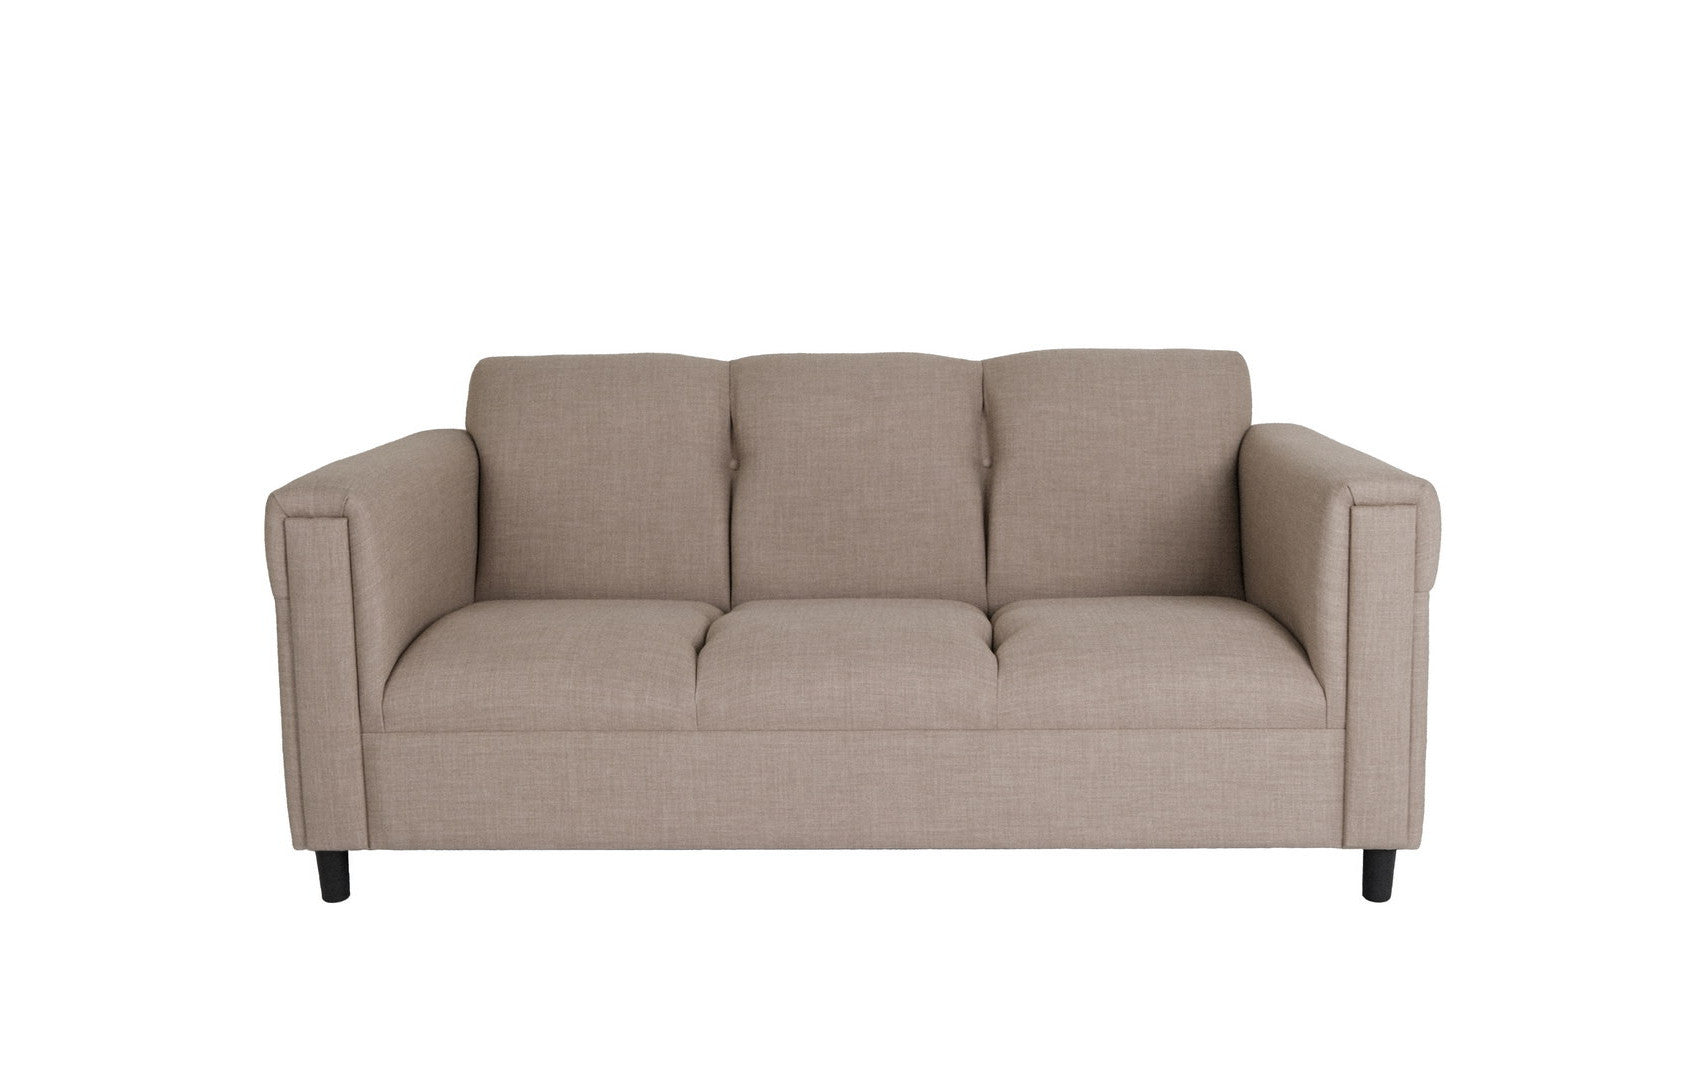 72" Beige And Black Polyester Sofa